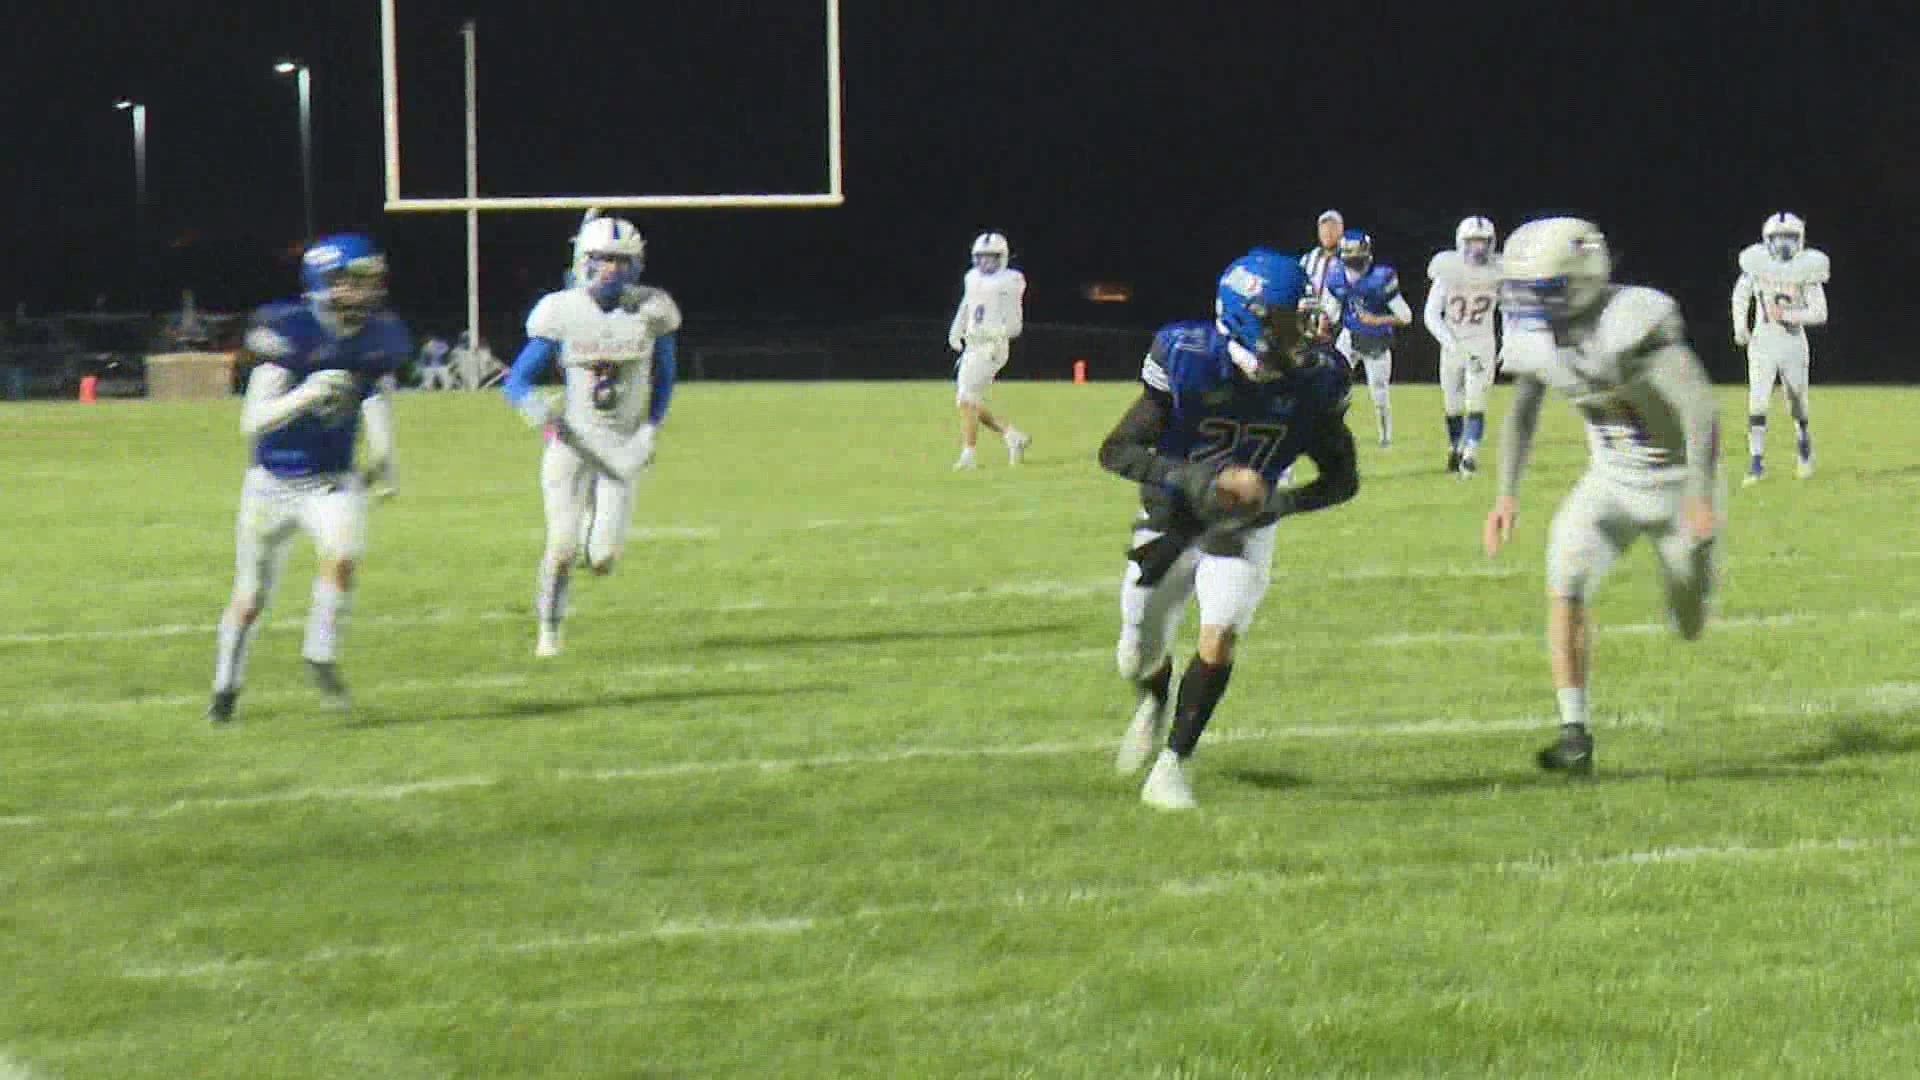 Highlights from Division 7 playoff action between Morley Stanwood and Ravenna.